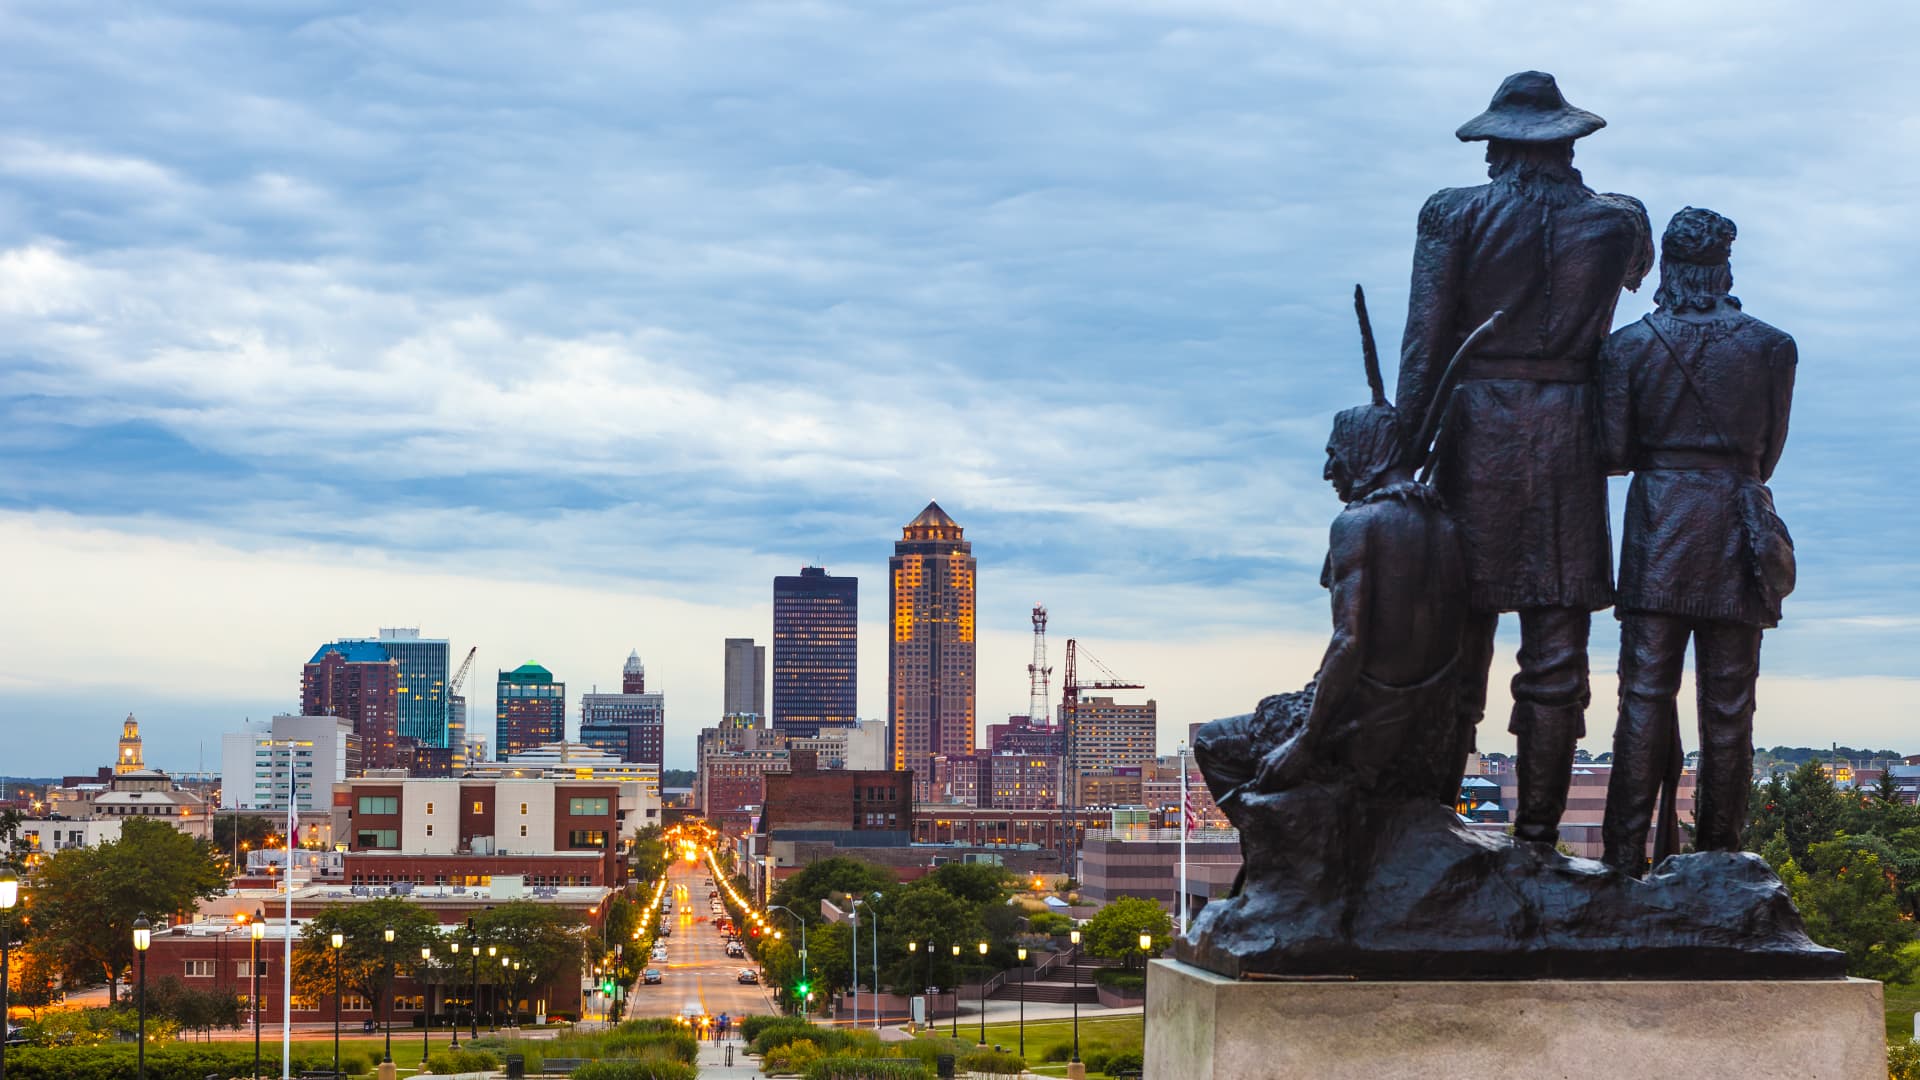 Downtown Des Moines, Iowa with the Pioneers of the Territory statue in the foreground.